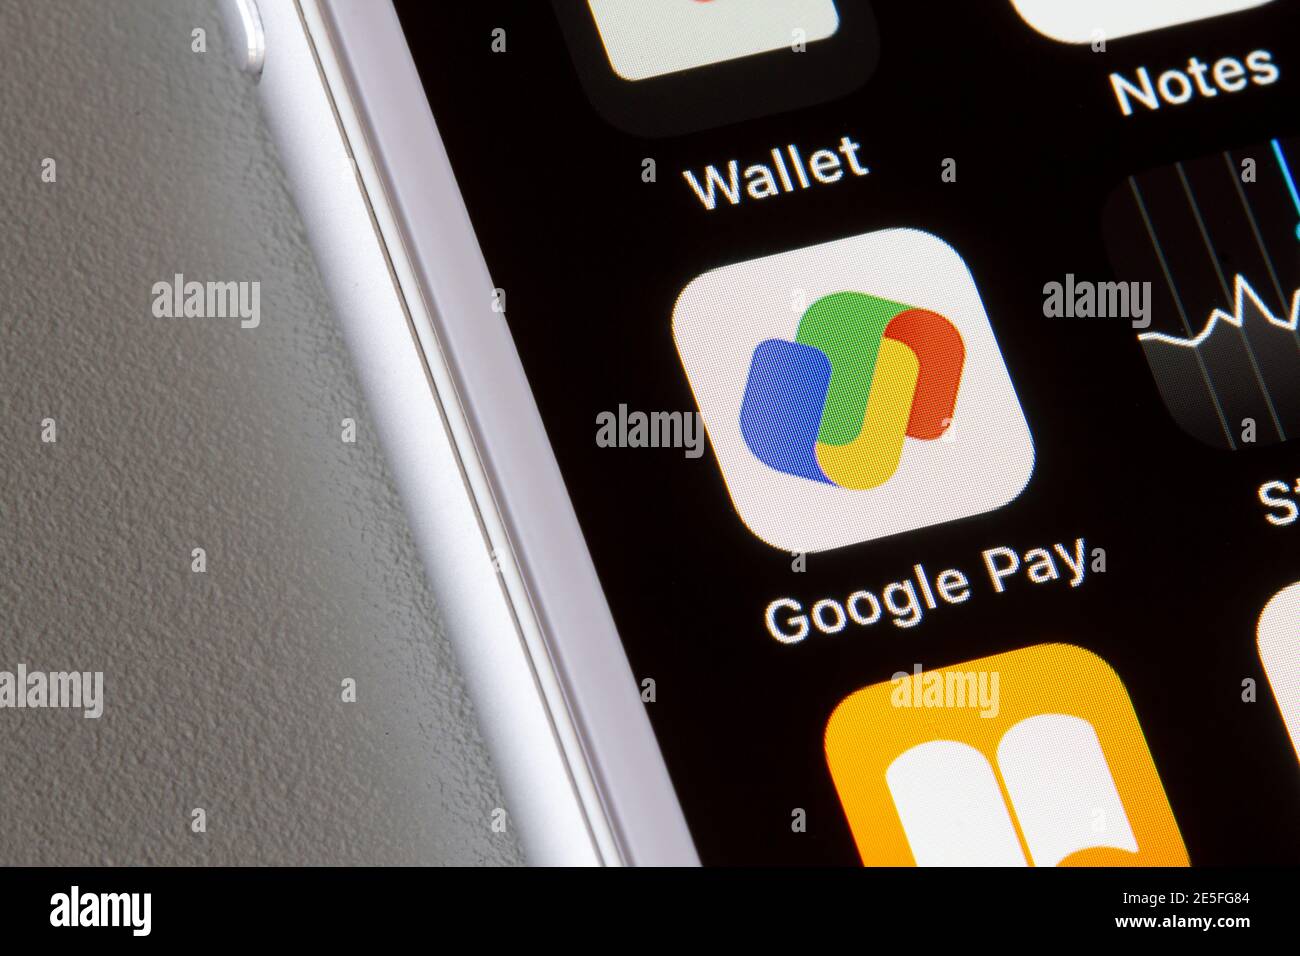 Google Pay app icon is seen on an iPhone. Google Pay is a digital wallet platform and online payment system to power in-app and tap-to-pay purchases. Stock Photo